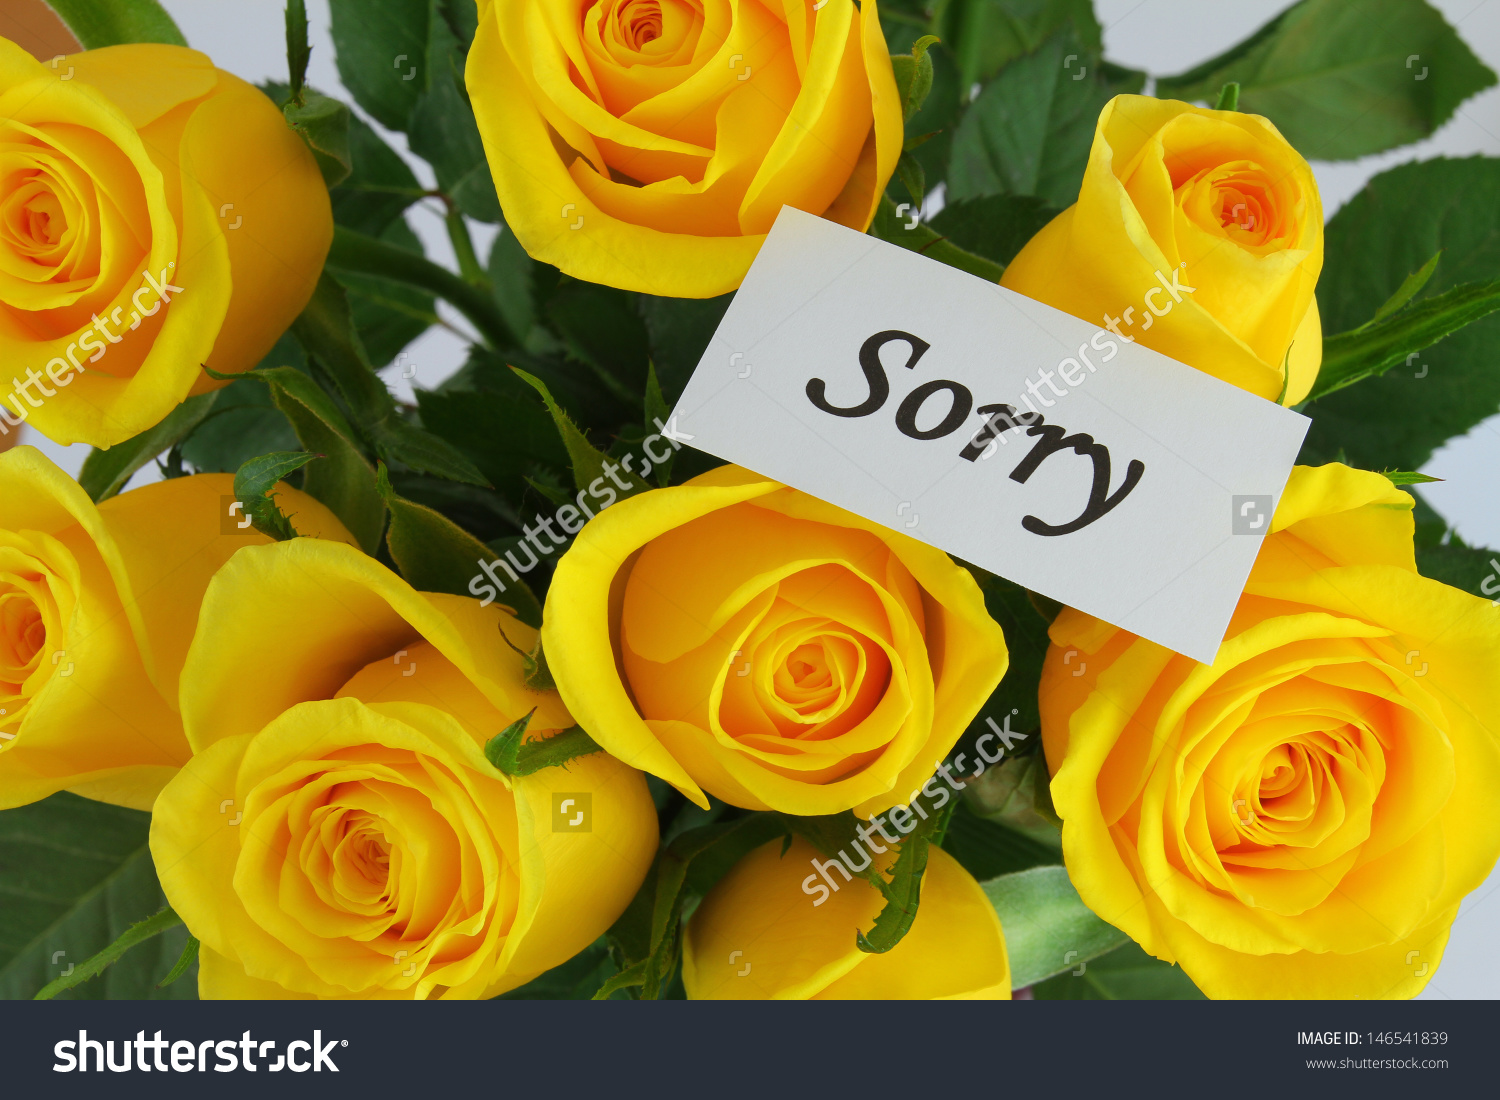 Sorry Card Yellow Roses Stock Photo 146541839 - Shutterstock